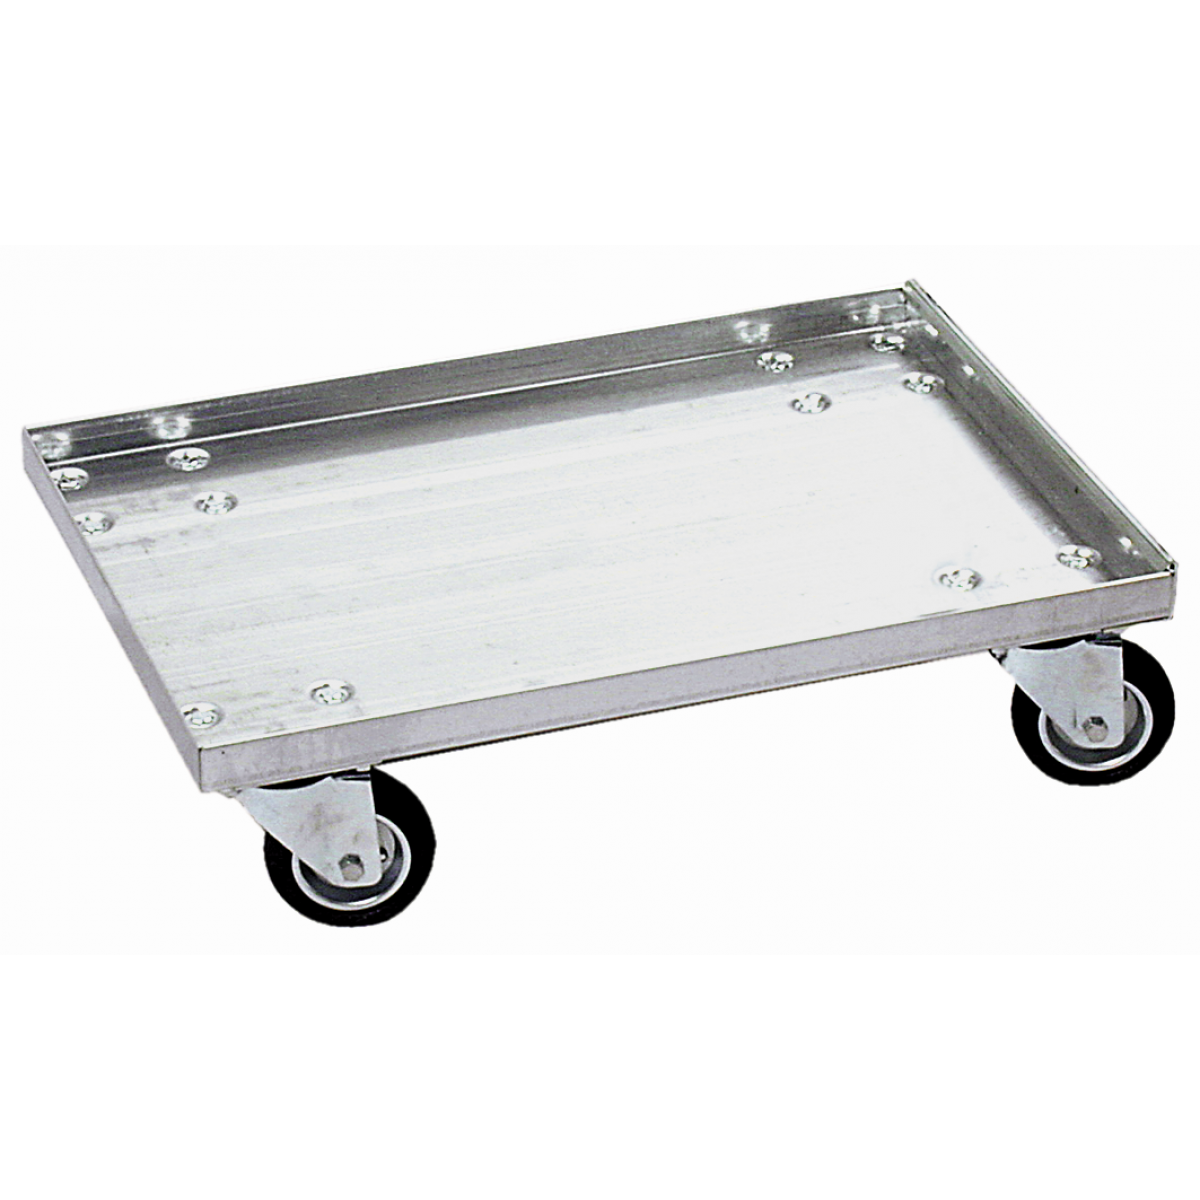 Designation:ESD transport trolley for storage containers, Dimension (WxD):610 x 410 mm